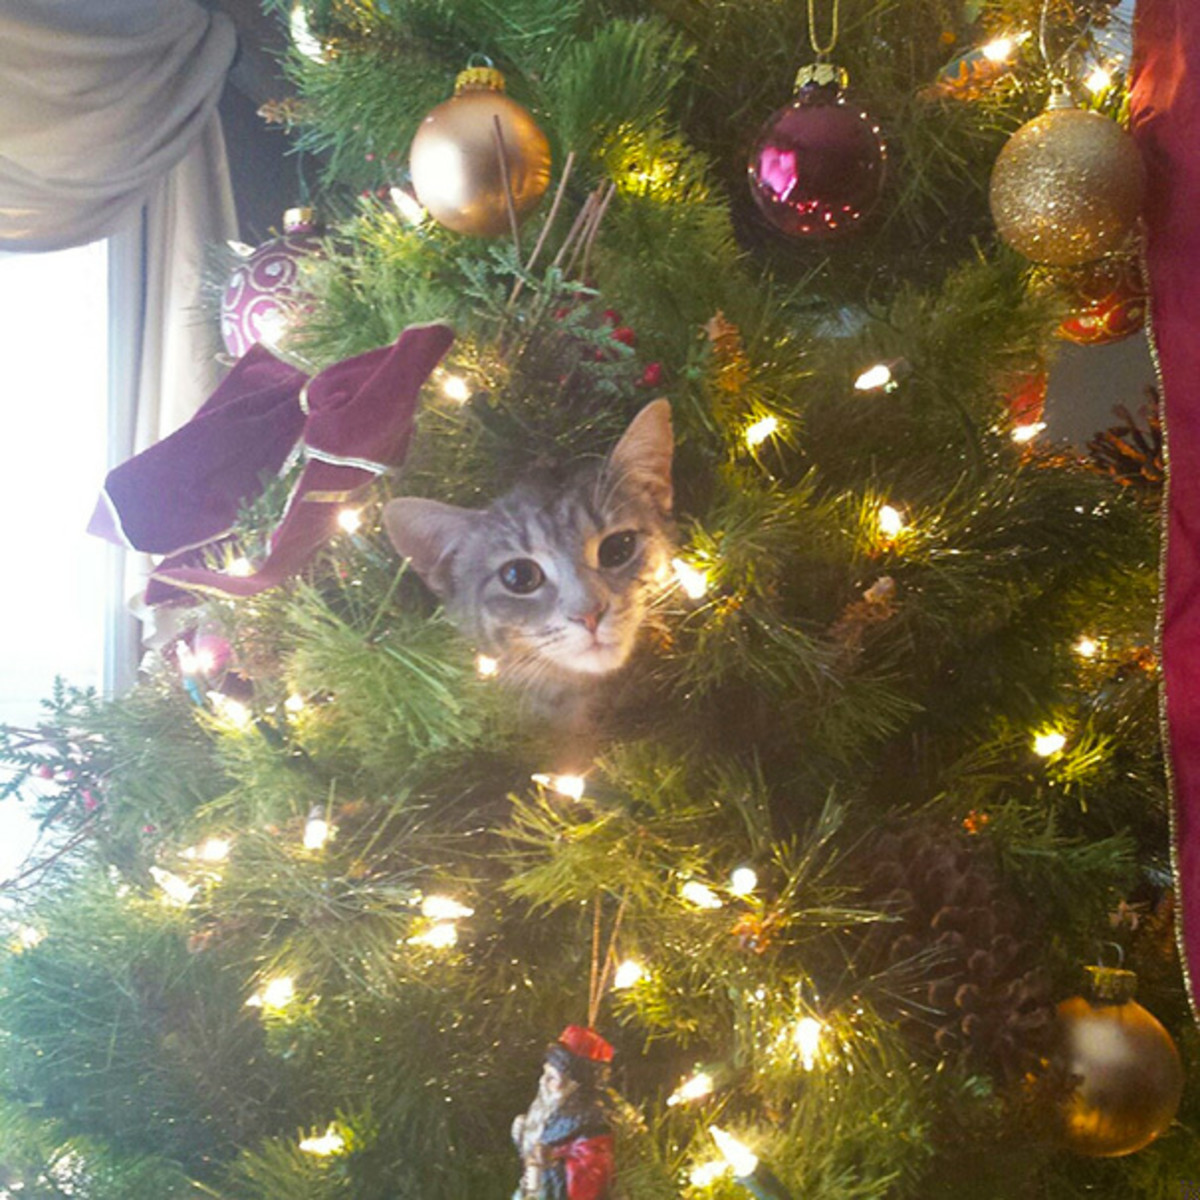 The Christmas tree is also your cat's favorite holiday tradition.